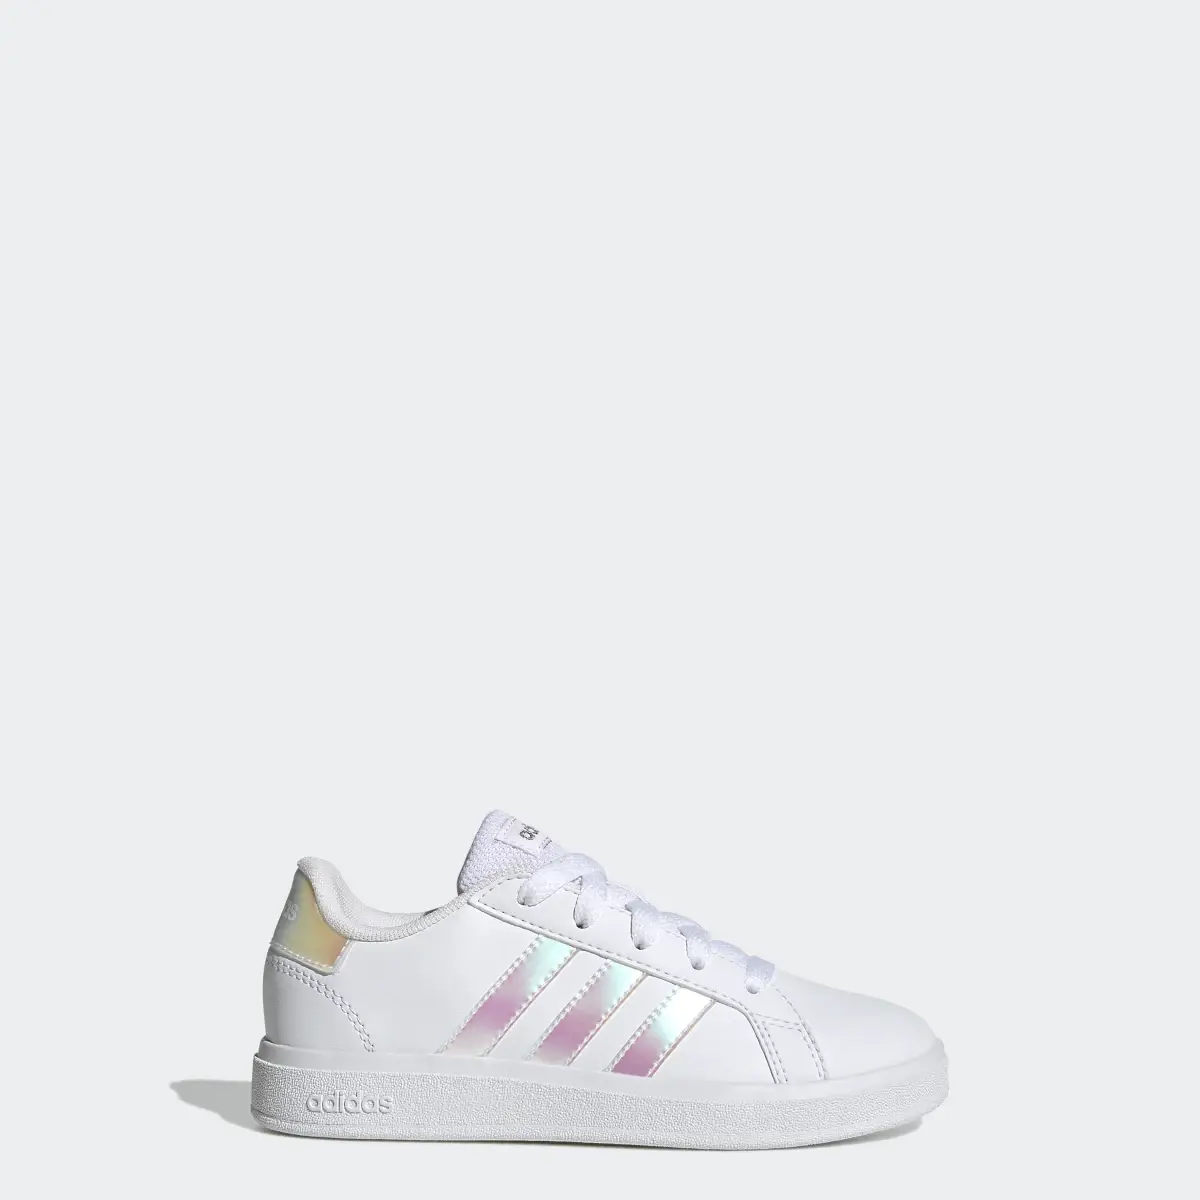 Adidas Grand Court Lifestyle Lace Tennis Shoes. 1